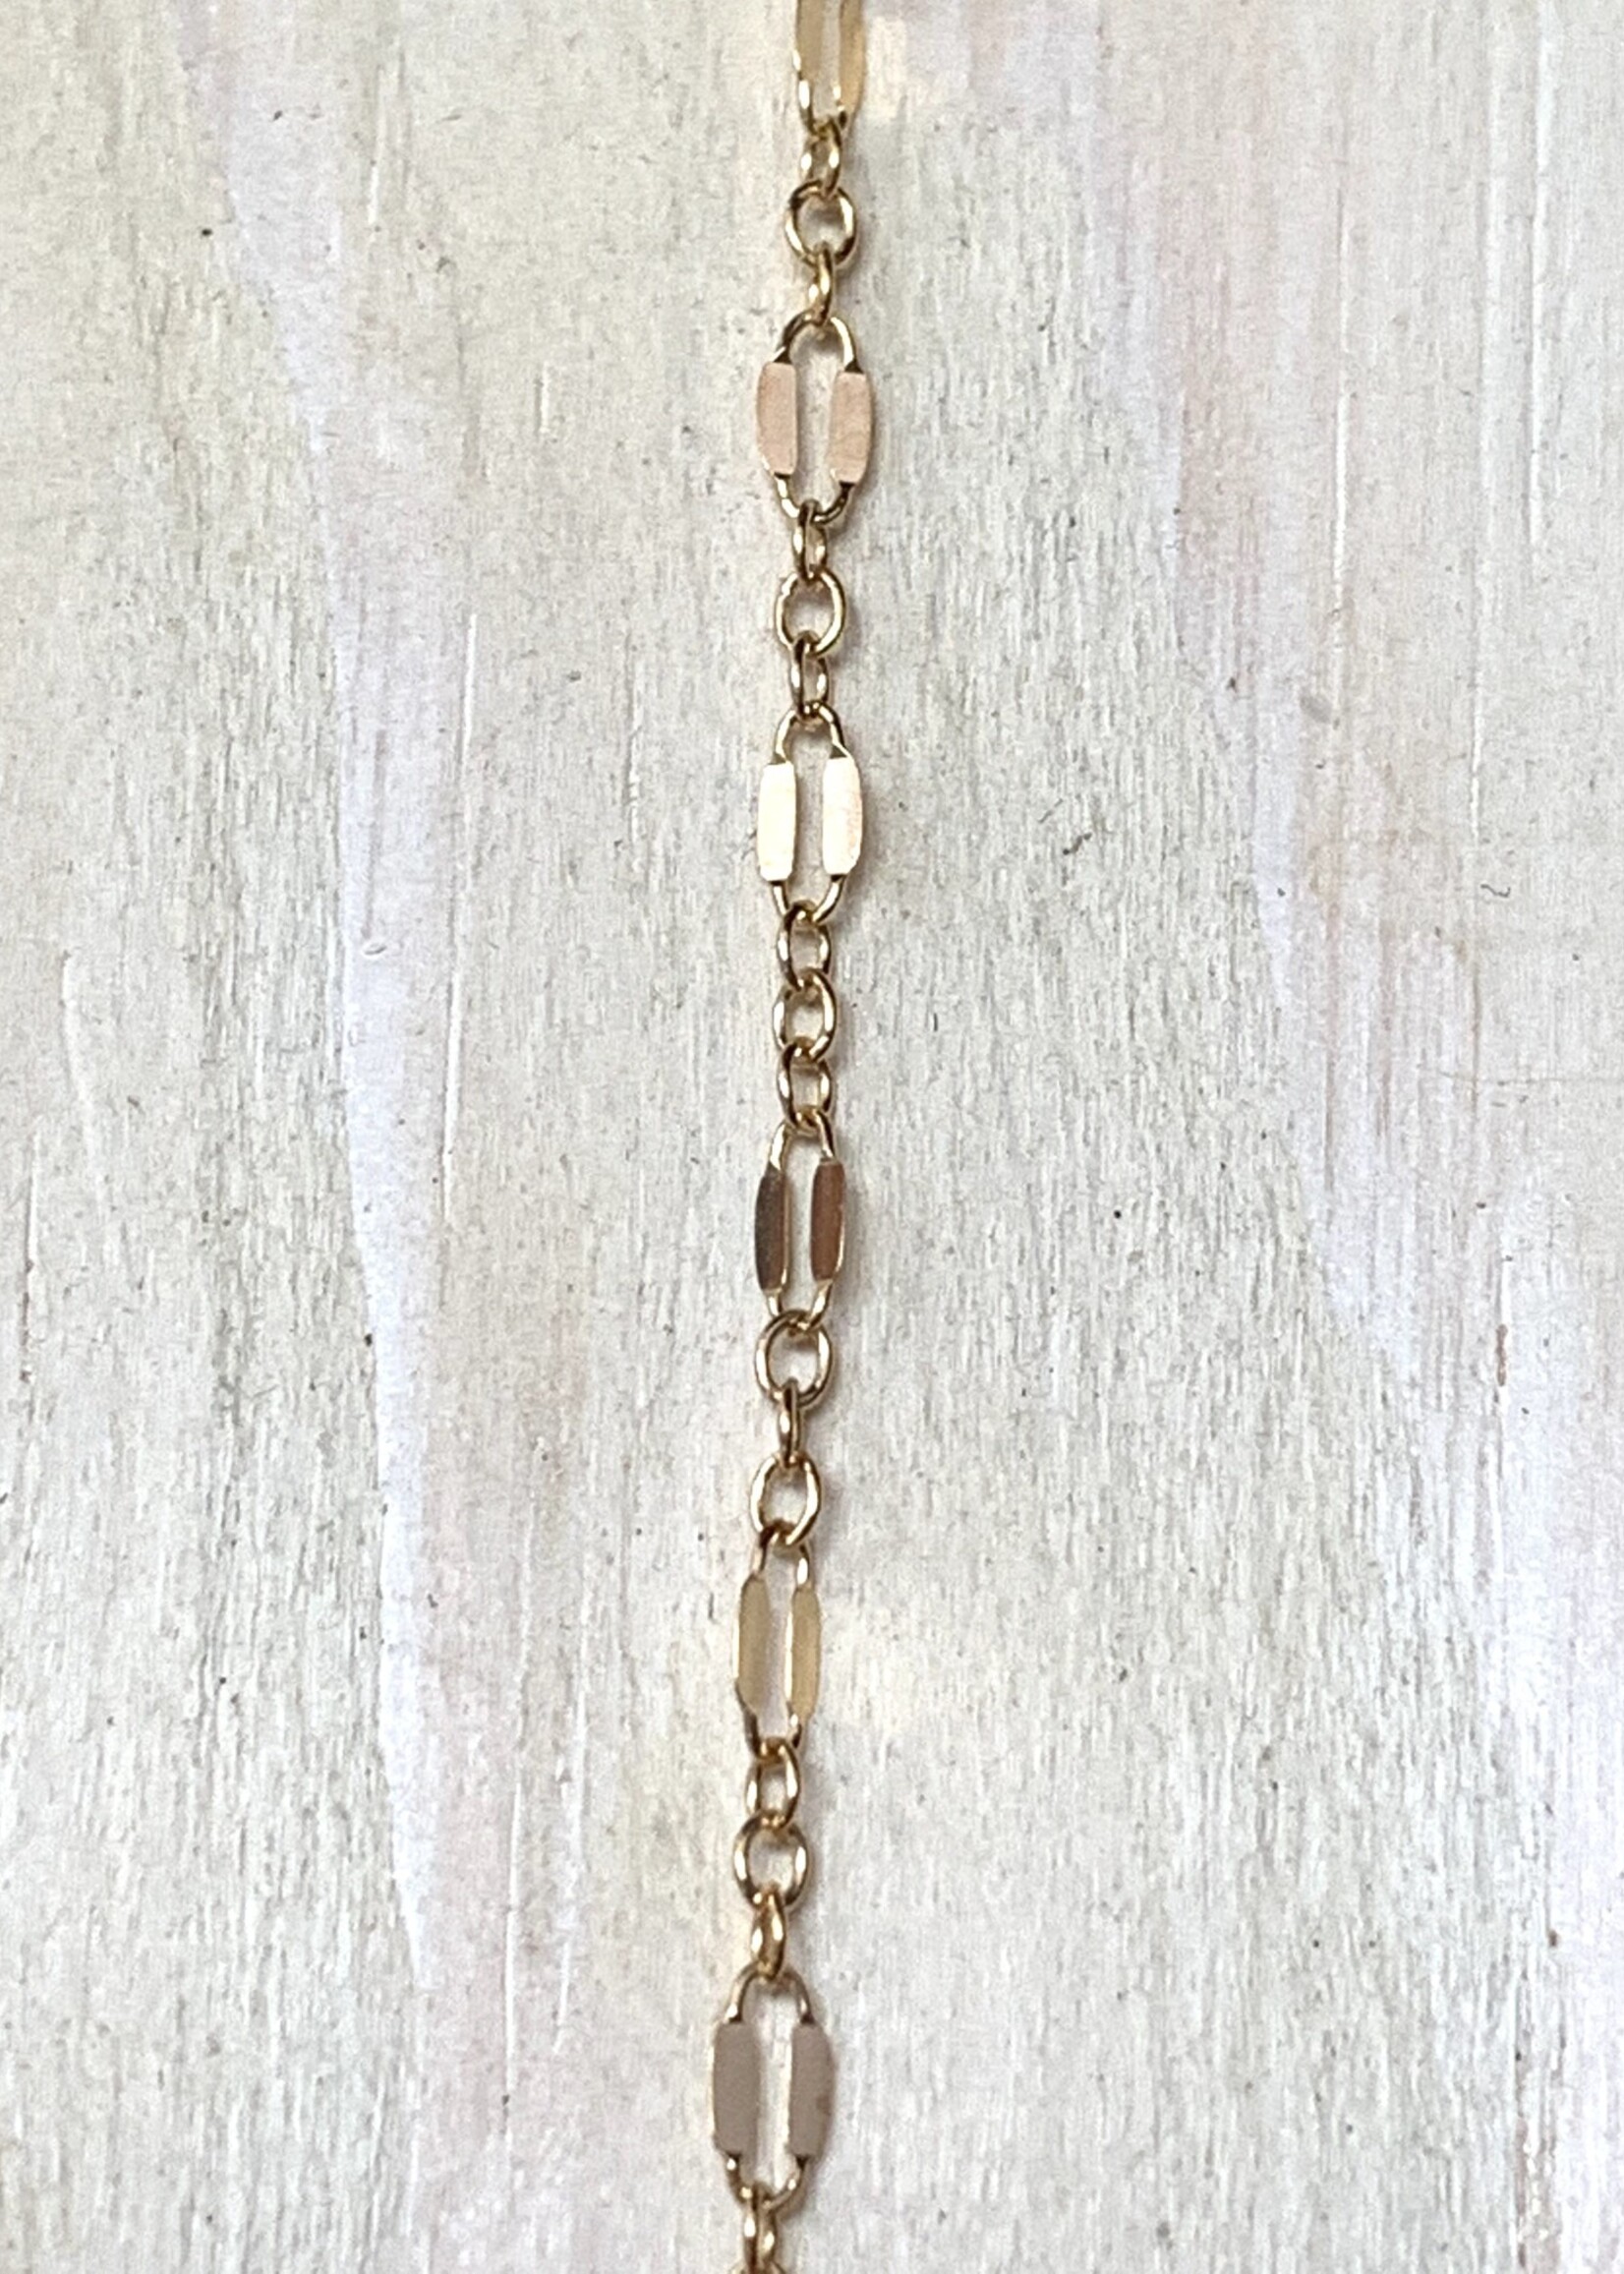 Coffee Bean Chain 14K Gold Filled Inch